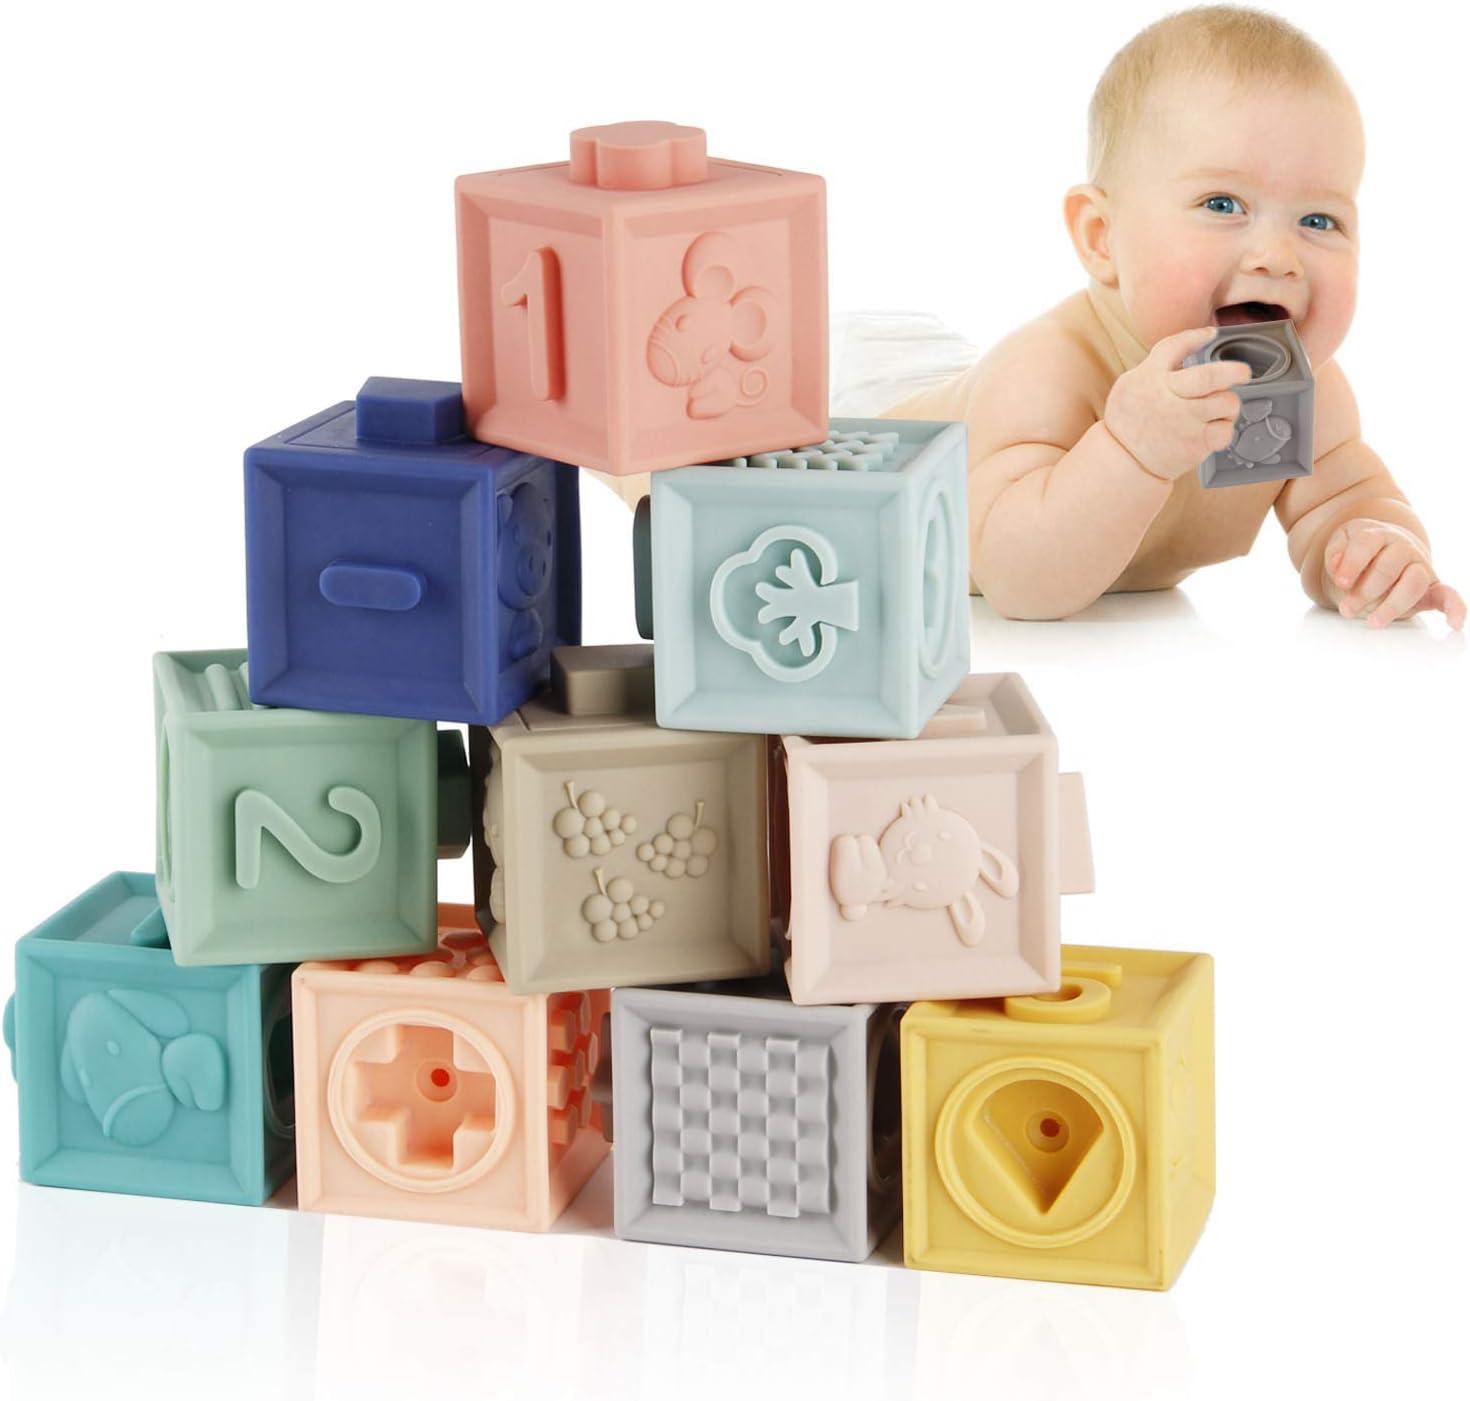 Mini Tudou Baby Blocks Soft Building Blocks Baby Toys Teethers Toy Educational Squeeze Play Review